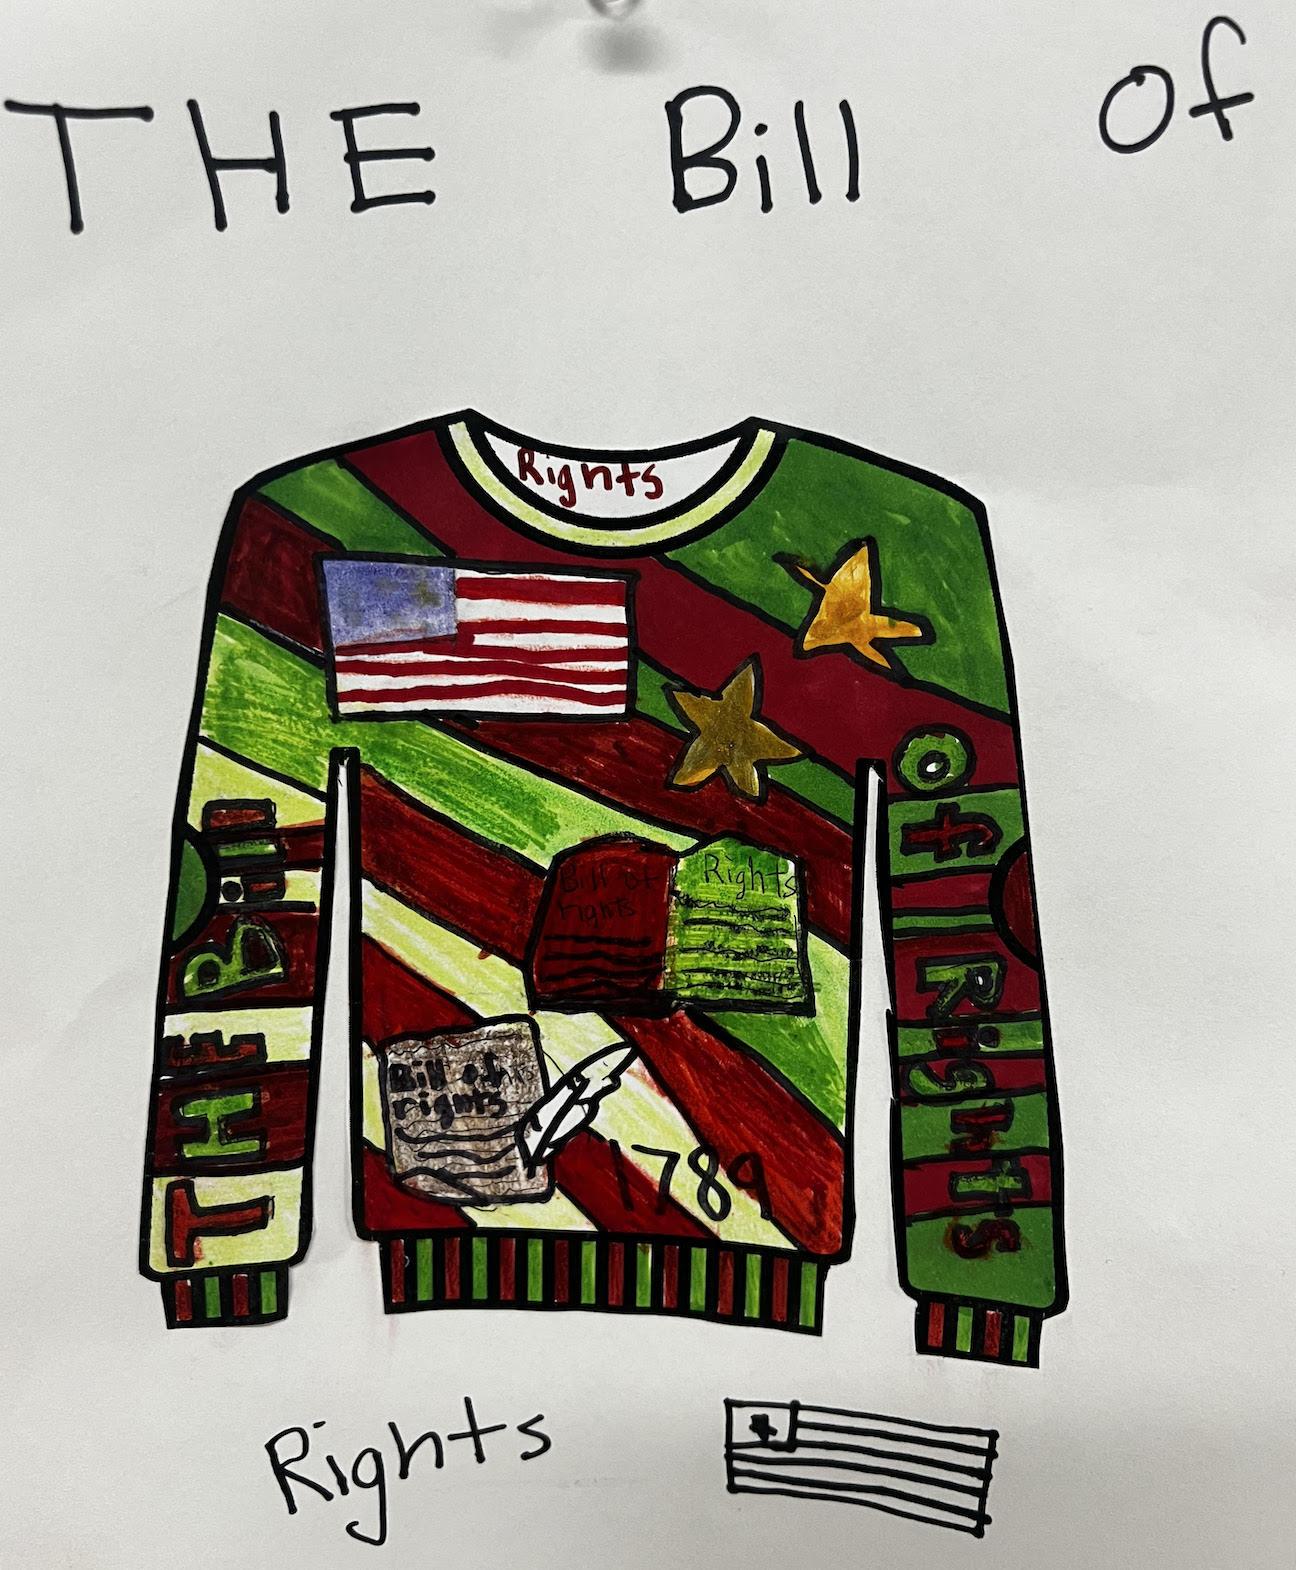 Sophia Nguyen selected the theme ‘Bill of Rights’